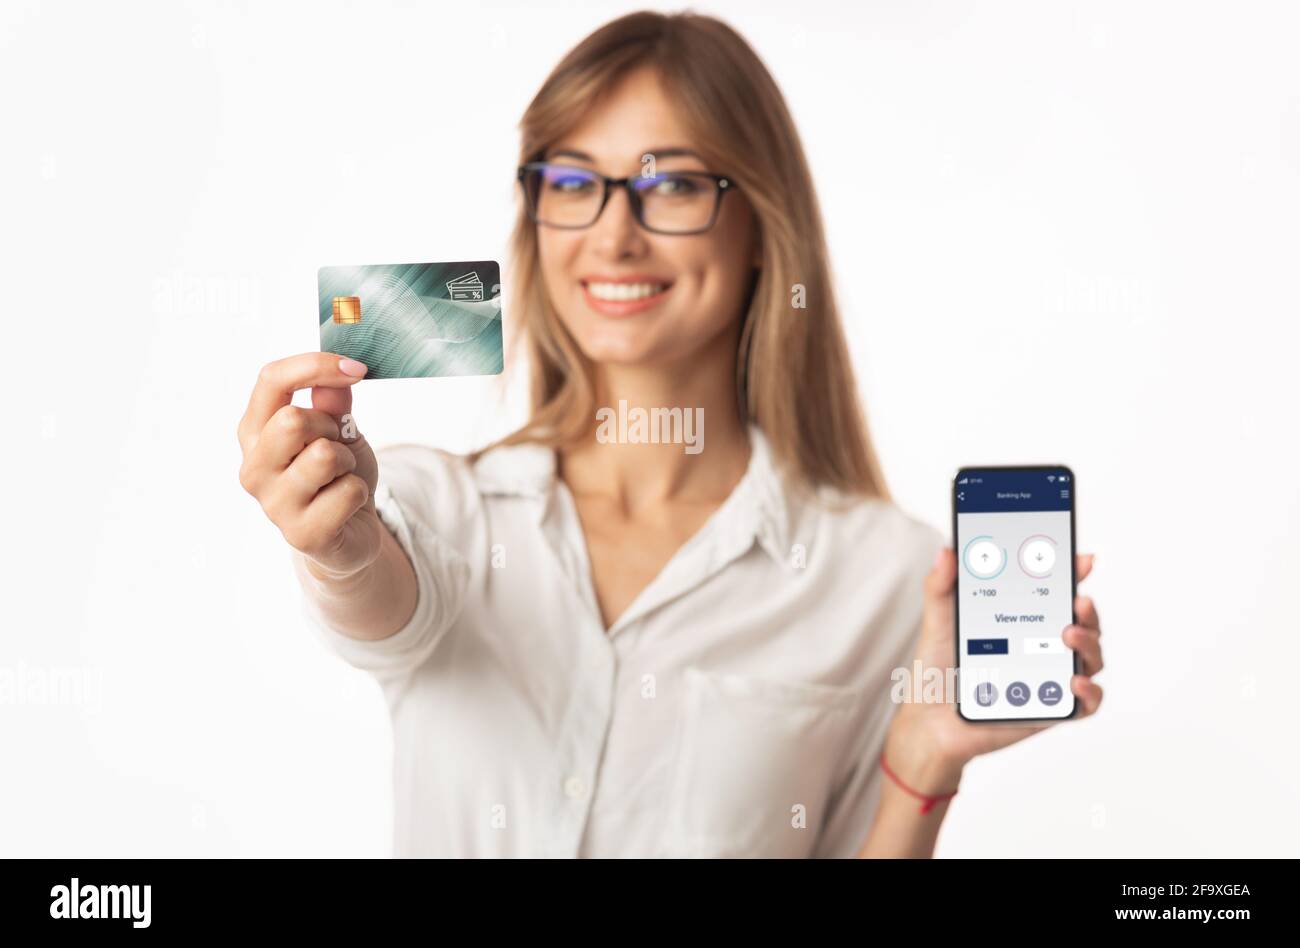 Pretty young woman showing credit card and banking app Stock Photo